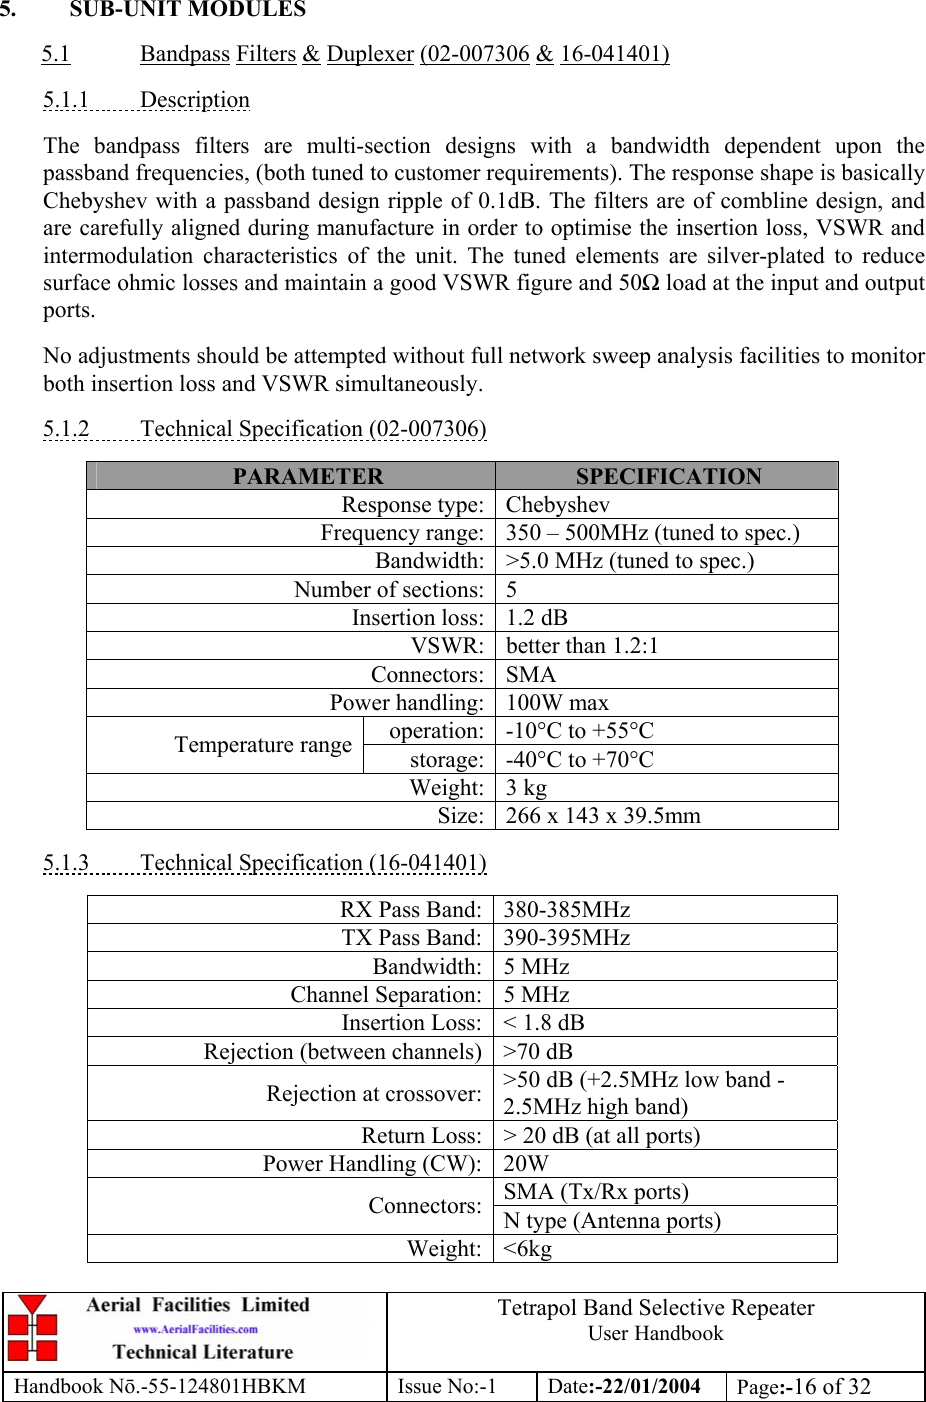  Tetrapol Band Selective Repeater User Handbook Handbook Nō.-55-124801HBKM Issue No:-1 Date:-22/01/2004  Page:-16 of 32   5. SUB-UNIT MODULES  5.1 Bandpass Filters &amp; Duplexer (02-007306 &amp; 16-041401)  5.1.1 Description  The bandpass filters are multi-section designs with a bandwidth dependent upon the passband frequencies, (both tuned to customer requirements). The response shape is basically Chebyshev with a passband design ripple of 0.1dB. The filters are of combline design, and are carefully aligned during manufacture in order to optimise the insertion loss, VSWR and intermodulation characteristics of the unit. The tuned elements are silver-plated to reduce surface ohmic losses and maintain a good VSWR figure and 50Ω load at the input and output ports.  No adjustments should be attempted without full network sweep analysis facilities to monitor both insertion loss and VSWR simultaneously.  5.1.2  Technical Specification (02-007306)  PARAMETER  SPECIFICATION Response type: Chebyshev Frequency range: 350 – 500MHz (tuned to spec.) Bandwidth: &gt;5.0 MHz (tuned to spec.) Number of sections: 5 Insertion loss: 1.2 dB VSWR: better than 1.2:1 Connectors: SMA Power handling: 100W max operation: -10°C to +55°C Temperature range storage: -40°C to +70°C Weight: 3 kg Size: 266 x 143 x 39.5mm  5.1.3  Technical Specification (16-041401)  RX Pass Band: 380-385MHz TX Pass Band: 390-395MHz Bandwidth: 5 MHz Channel Separation: 5 MHz Insertion Loss: &lt; 1.8 dB Rejection (between channels) &gt;70 dB Rejection at crossover: &gt;50 dB (+2.5MHz low band -2.5MHz high band) Return Loss: &gt; 20 dB (at all ports) Power Handling (CW): 20W SMA (Tx/Rx ports) Connectors: N type (Antenna ports) Weight: &lt;6kg  